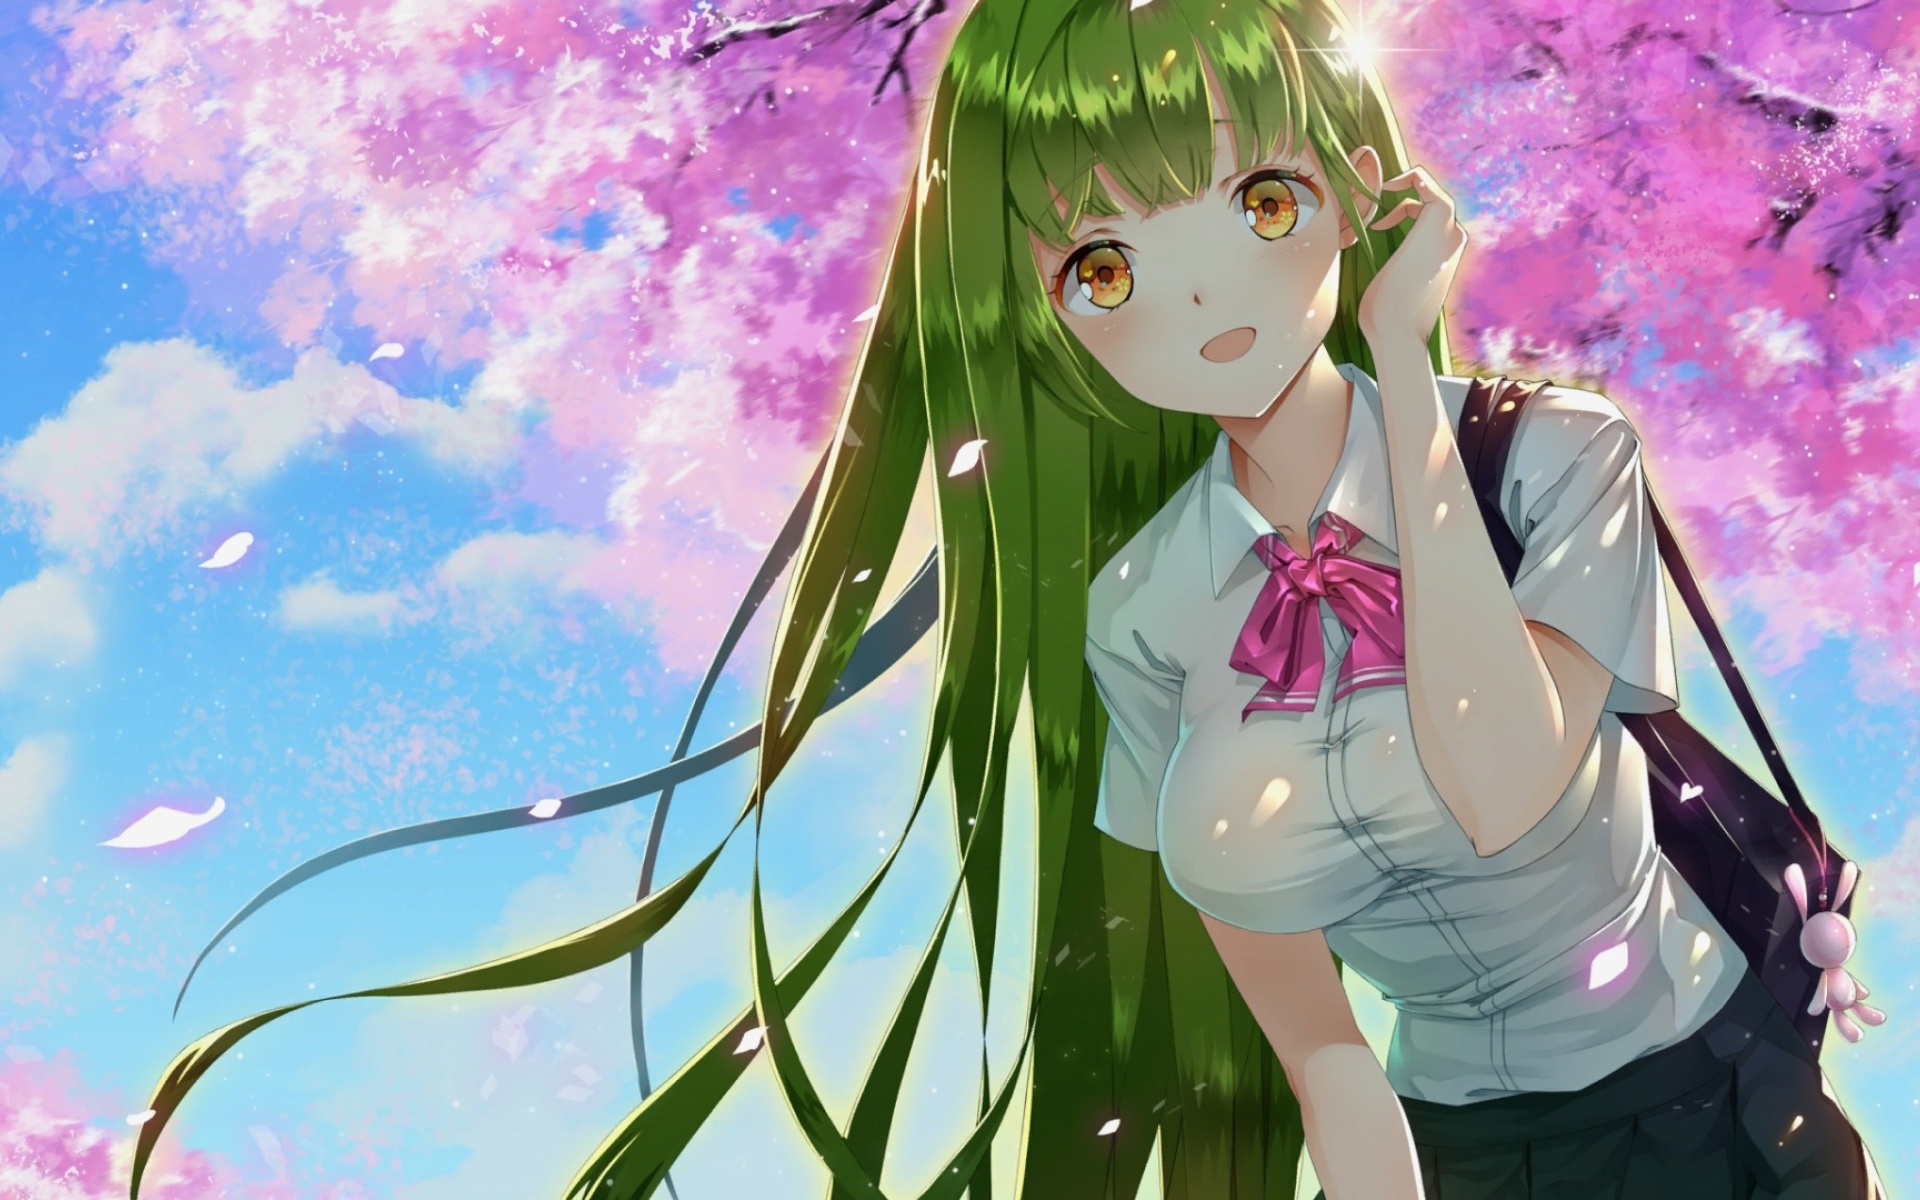 Anime girl with green hair and brown eyes